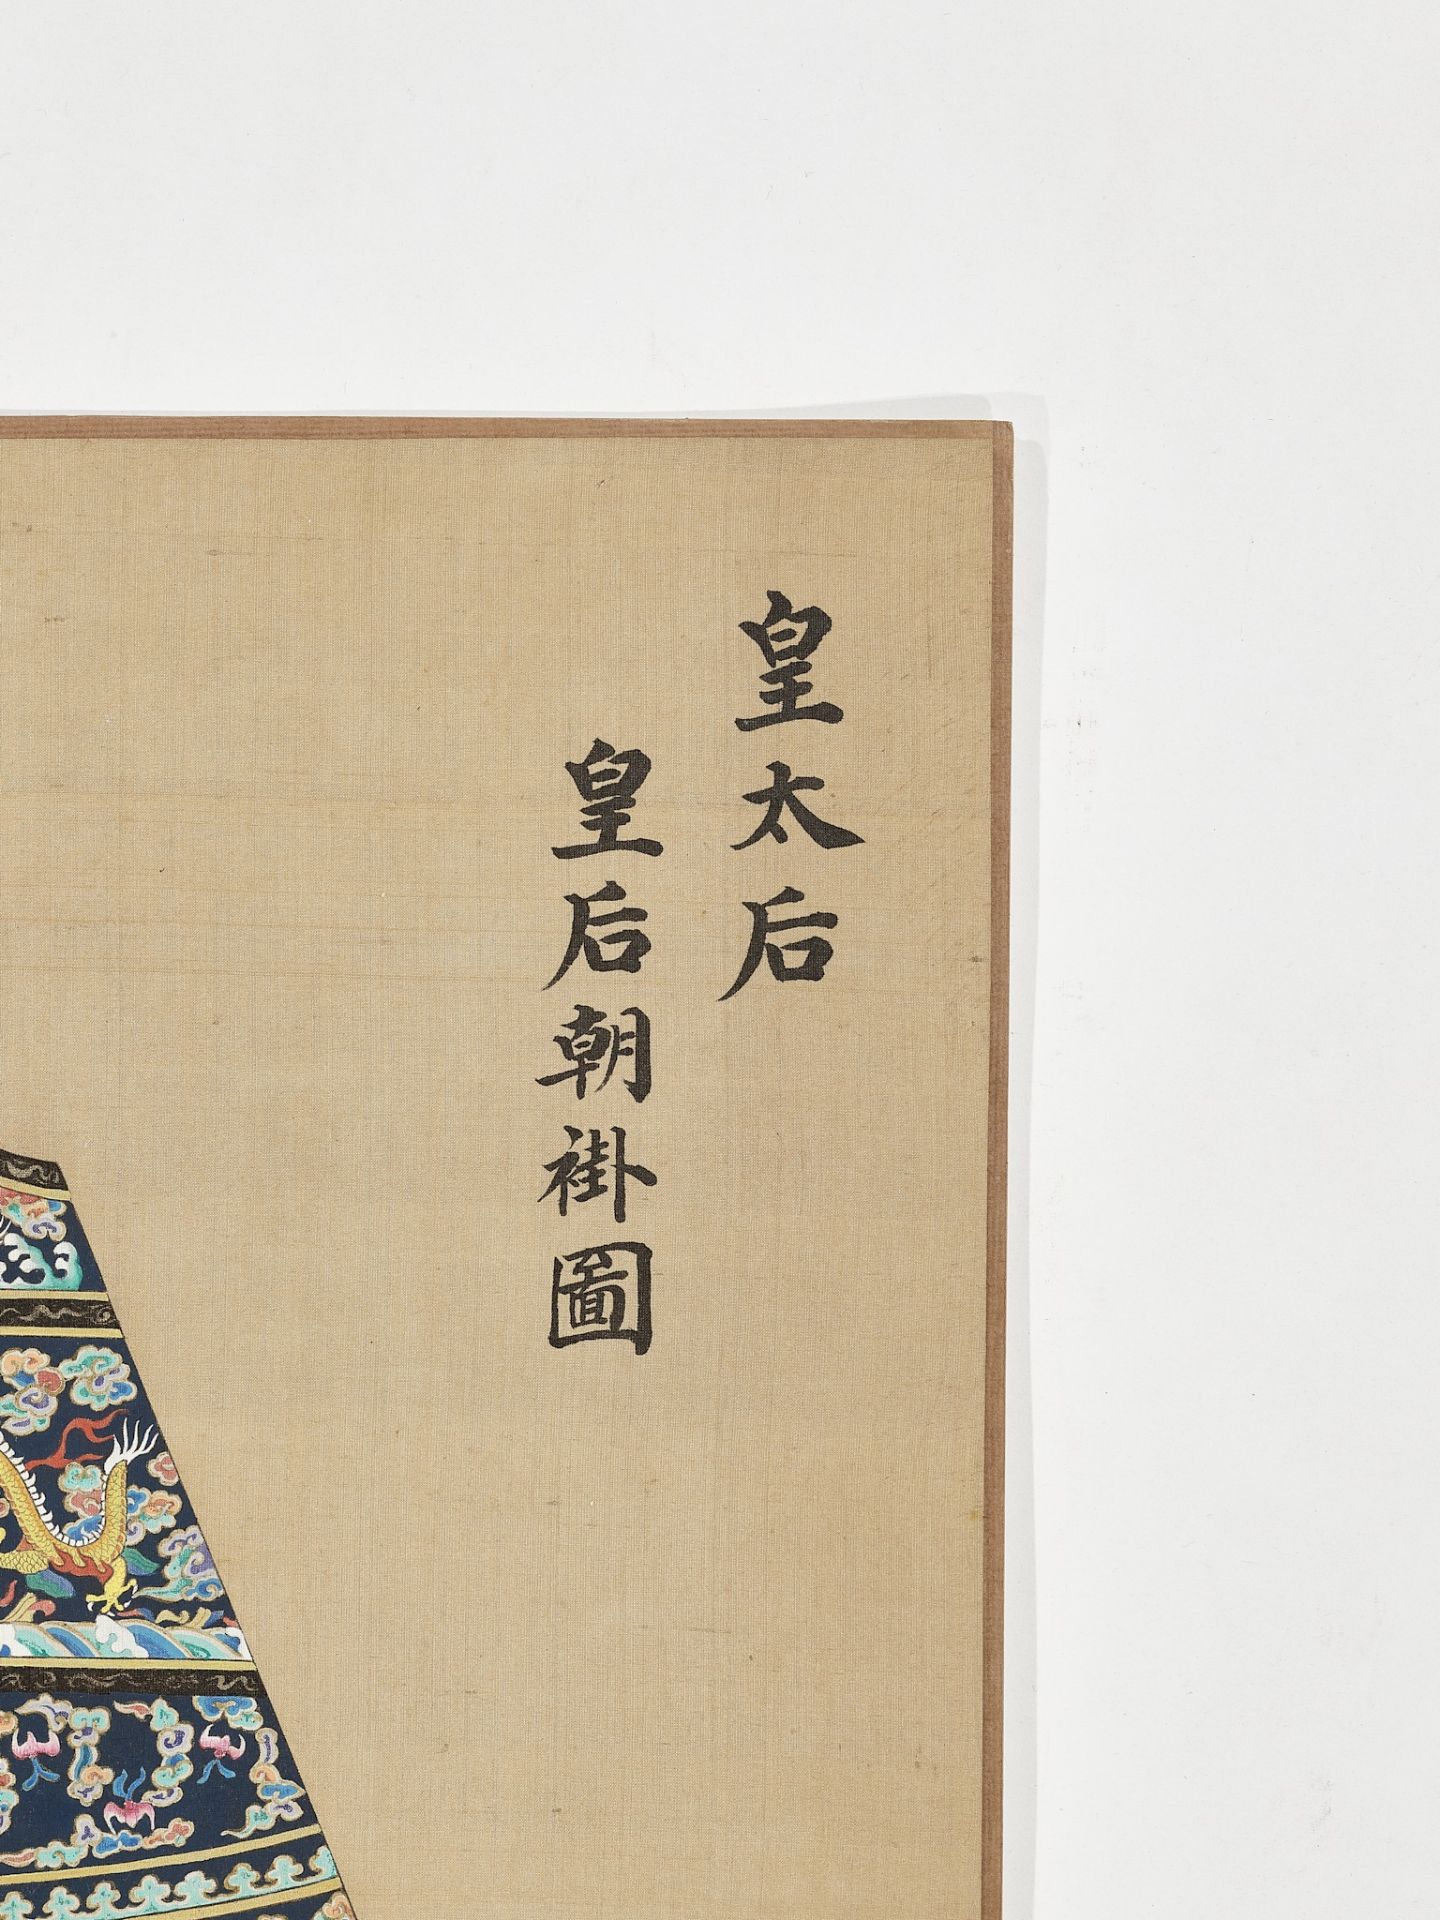 A RARE AND IMPORTANT ALBUM LEAF FROM THE HUANGCHAO LIQI TUSHI WITH AN IMPERIALLY INSCRIBED SILK PAIN - Image 7 of 21